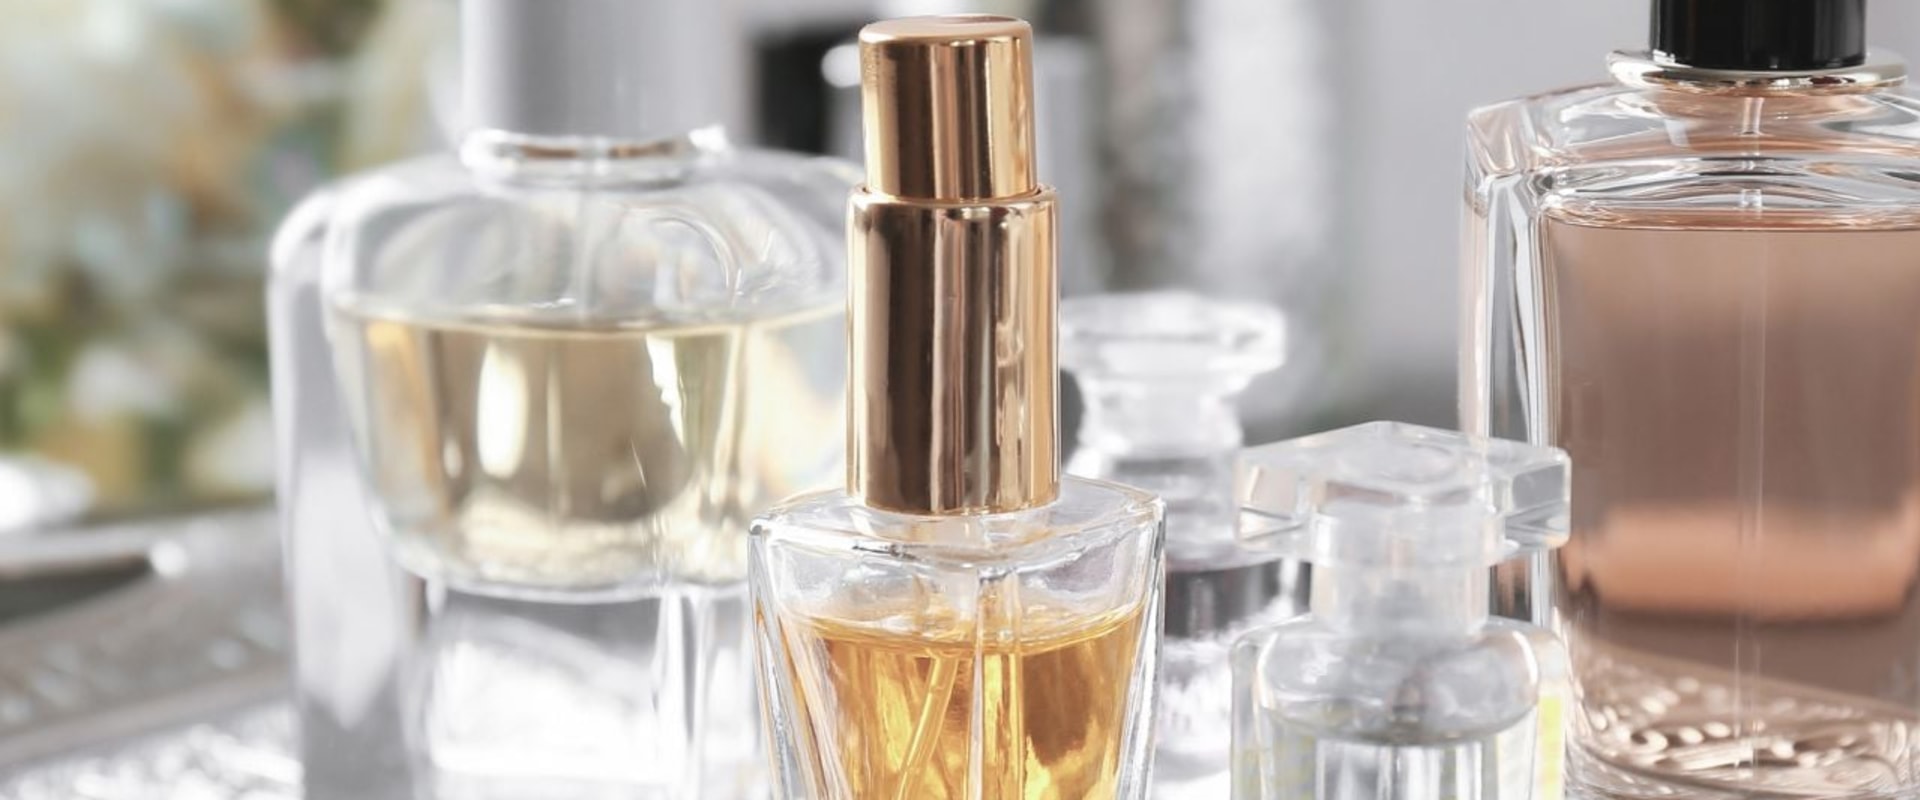 Tips for Accurately Testing Perfumes in Different Environments